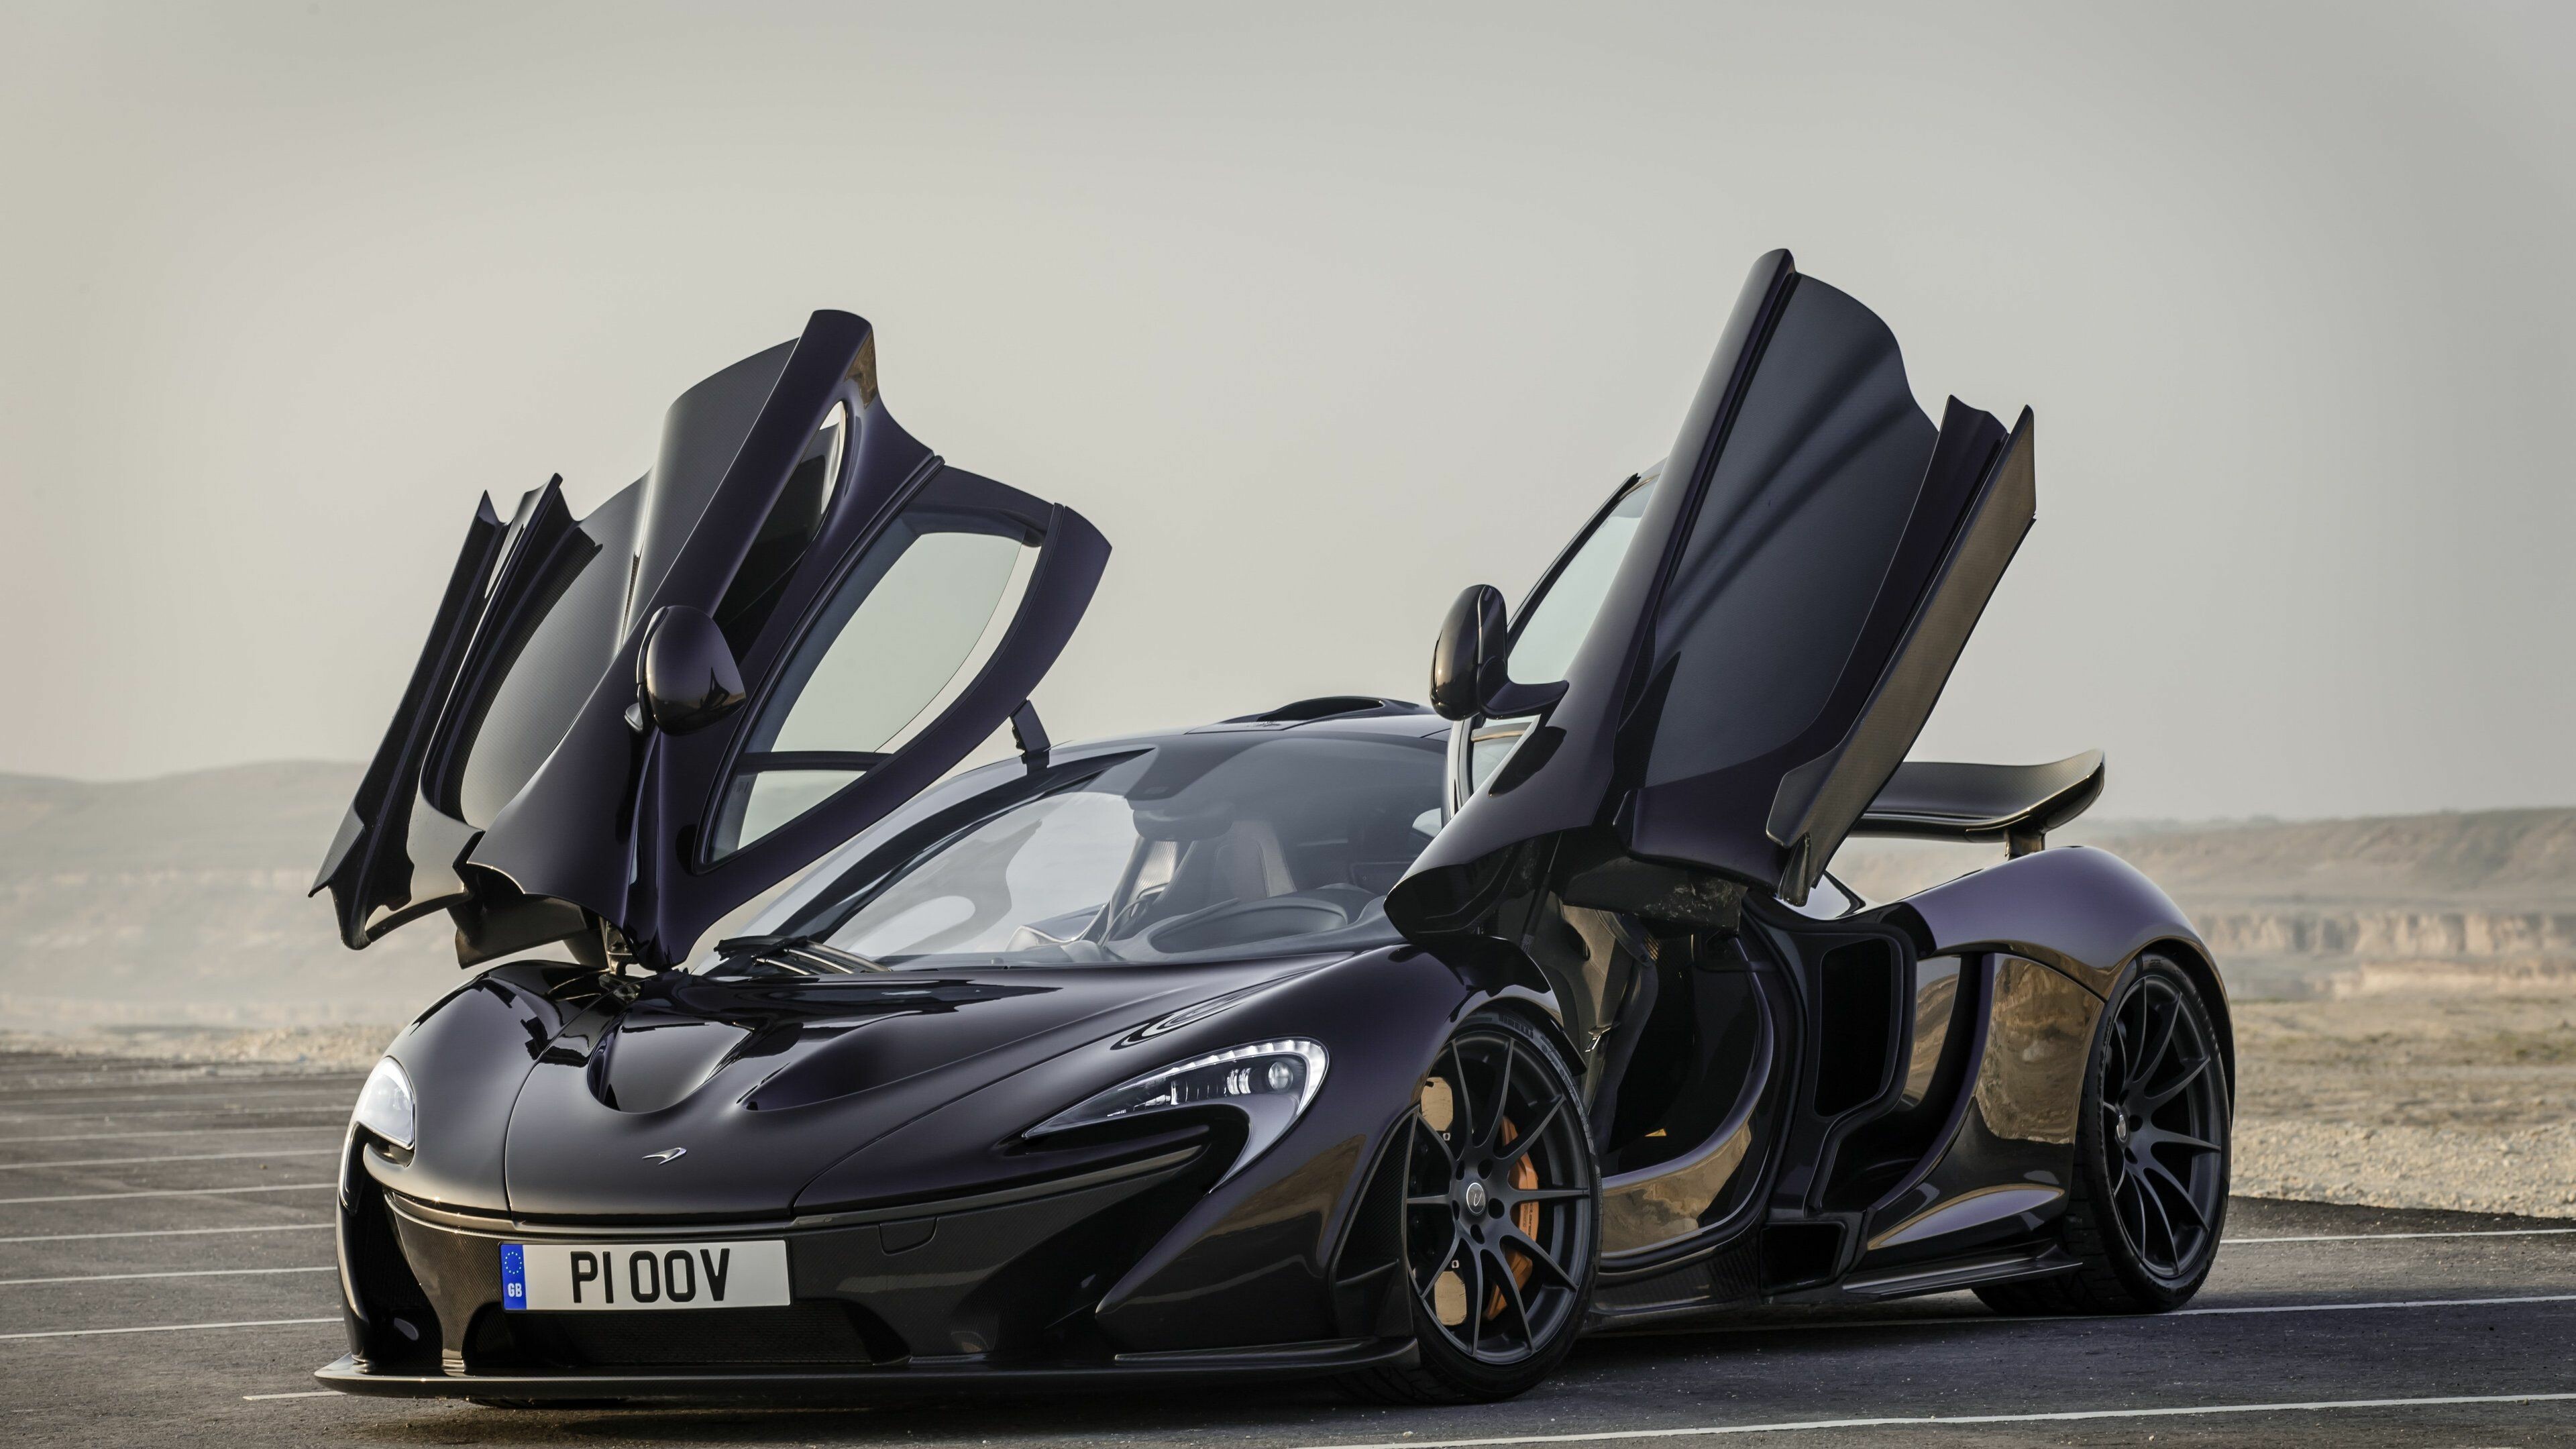 McLaren: One of the few remaining automakers that hasn't produced an SUV. 3840x2160 4K Wallpaper.